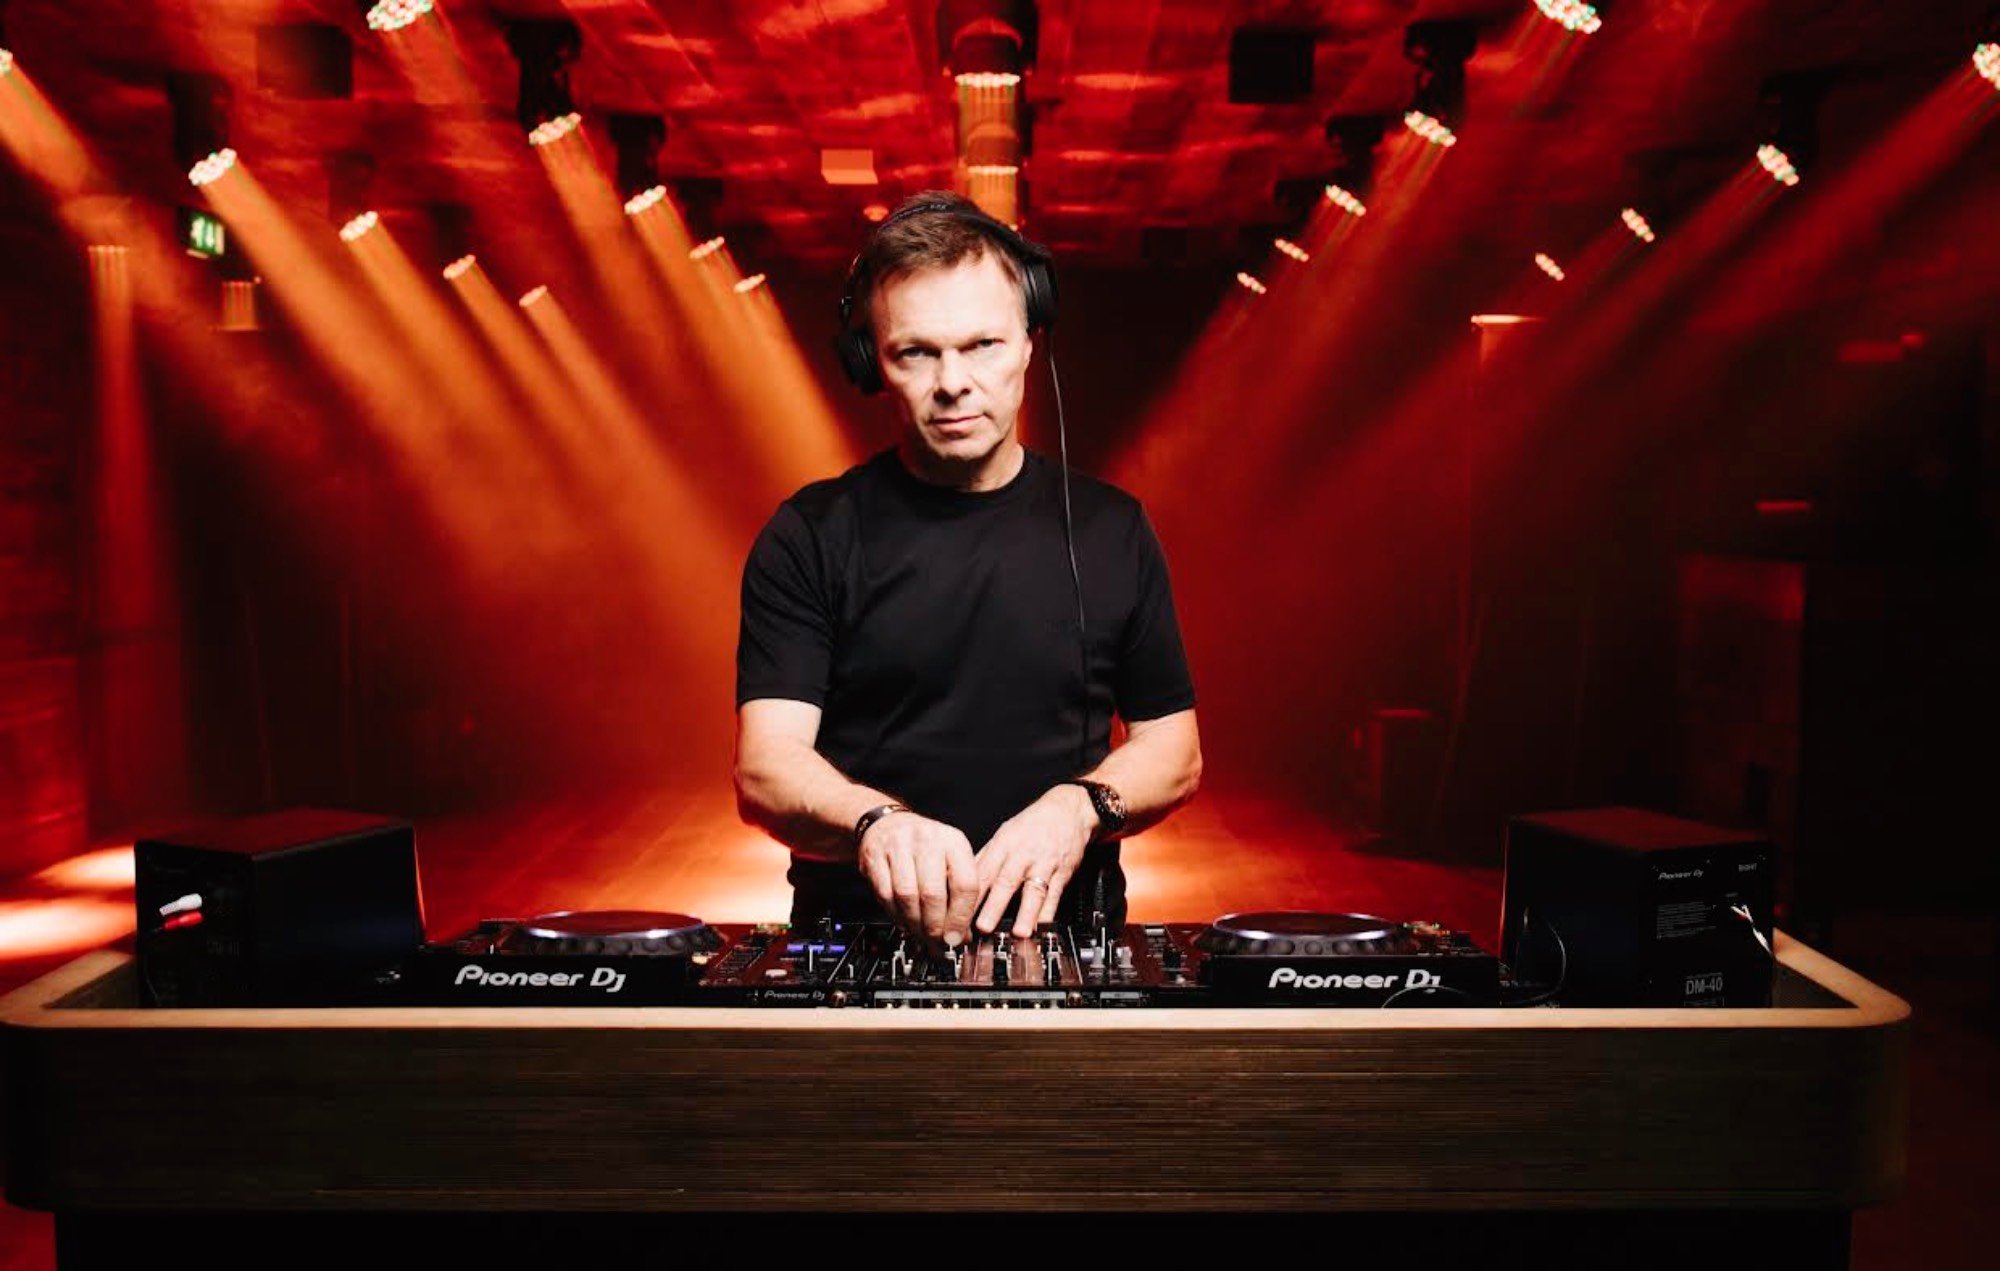 Pete Tong to become first ever DJ to play on the F1 grid at Silverstone